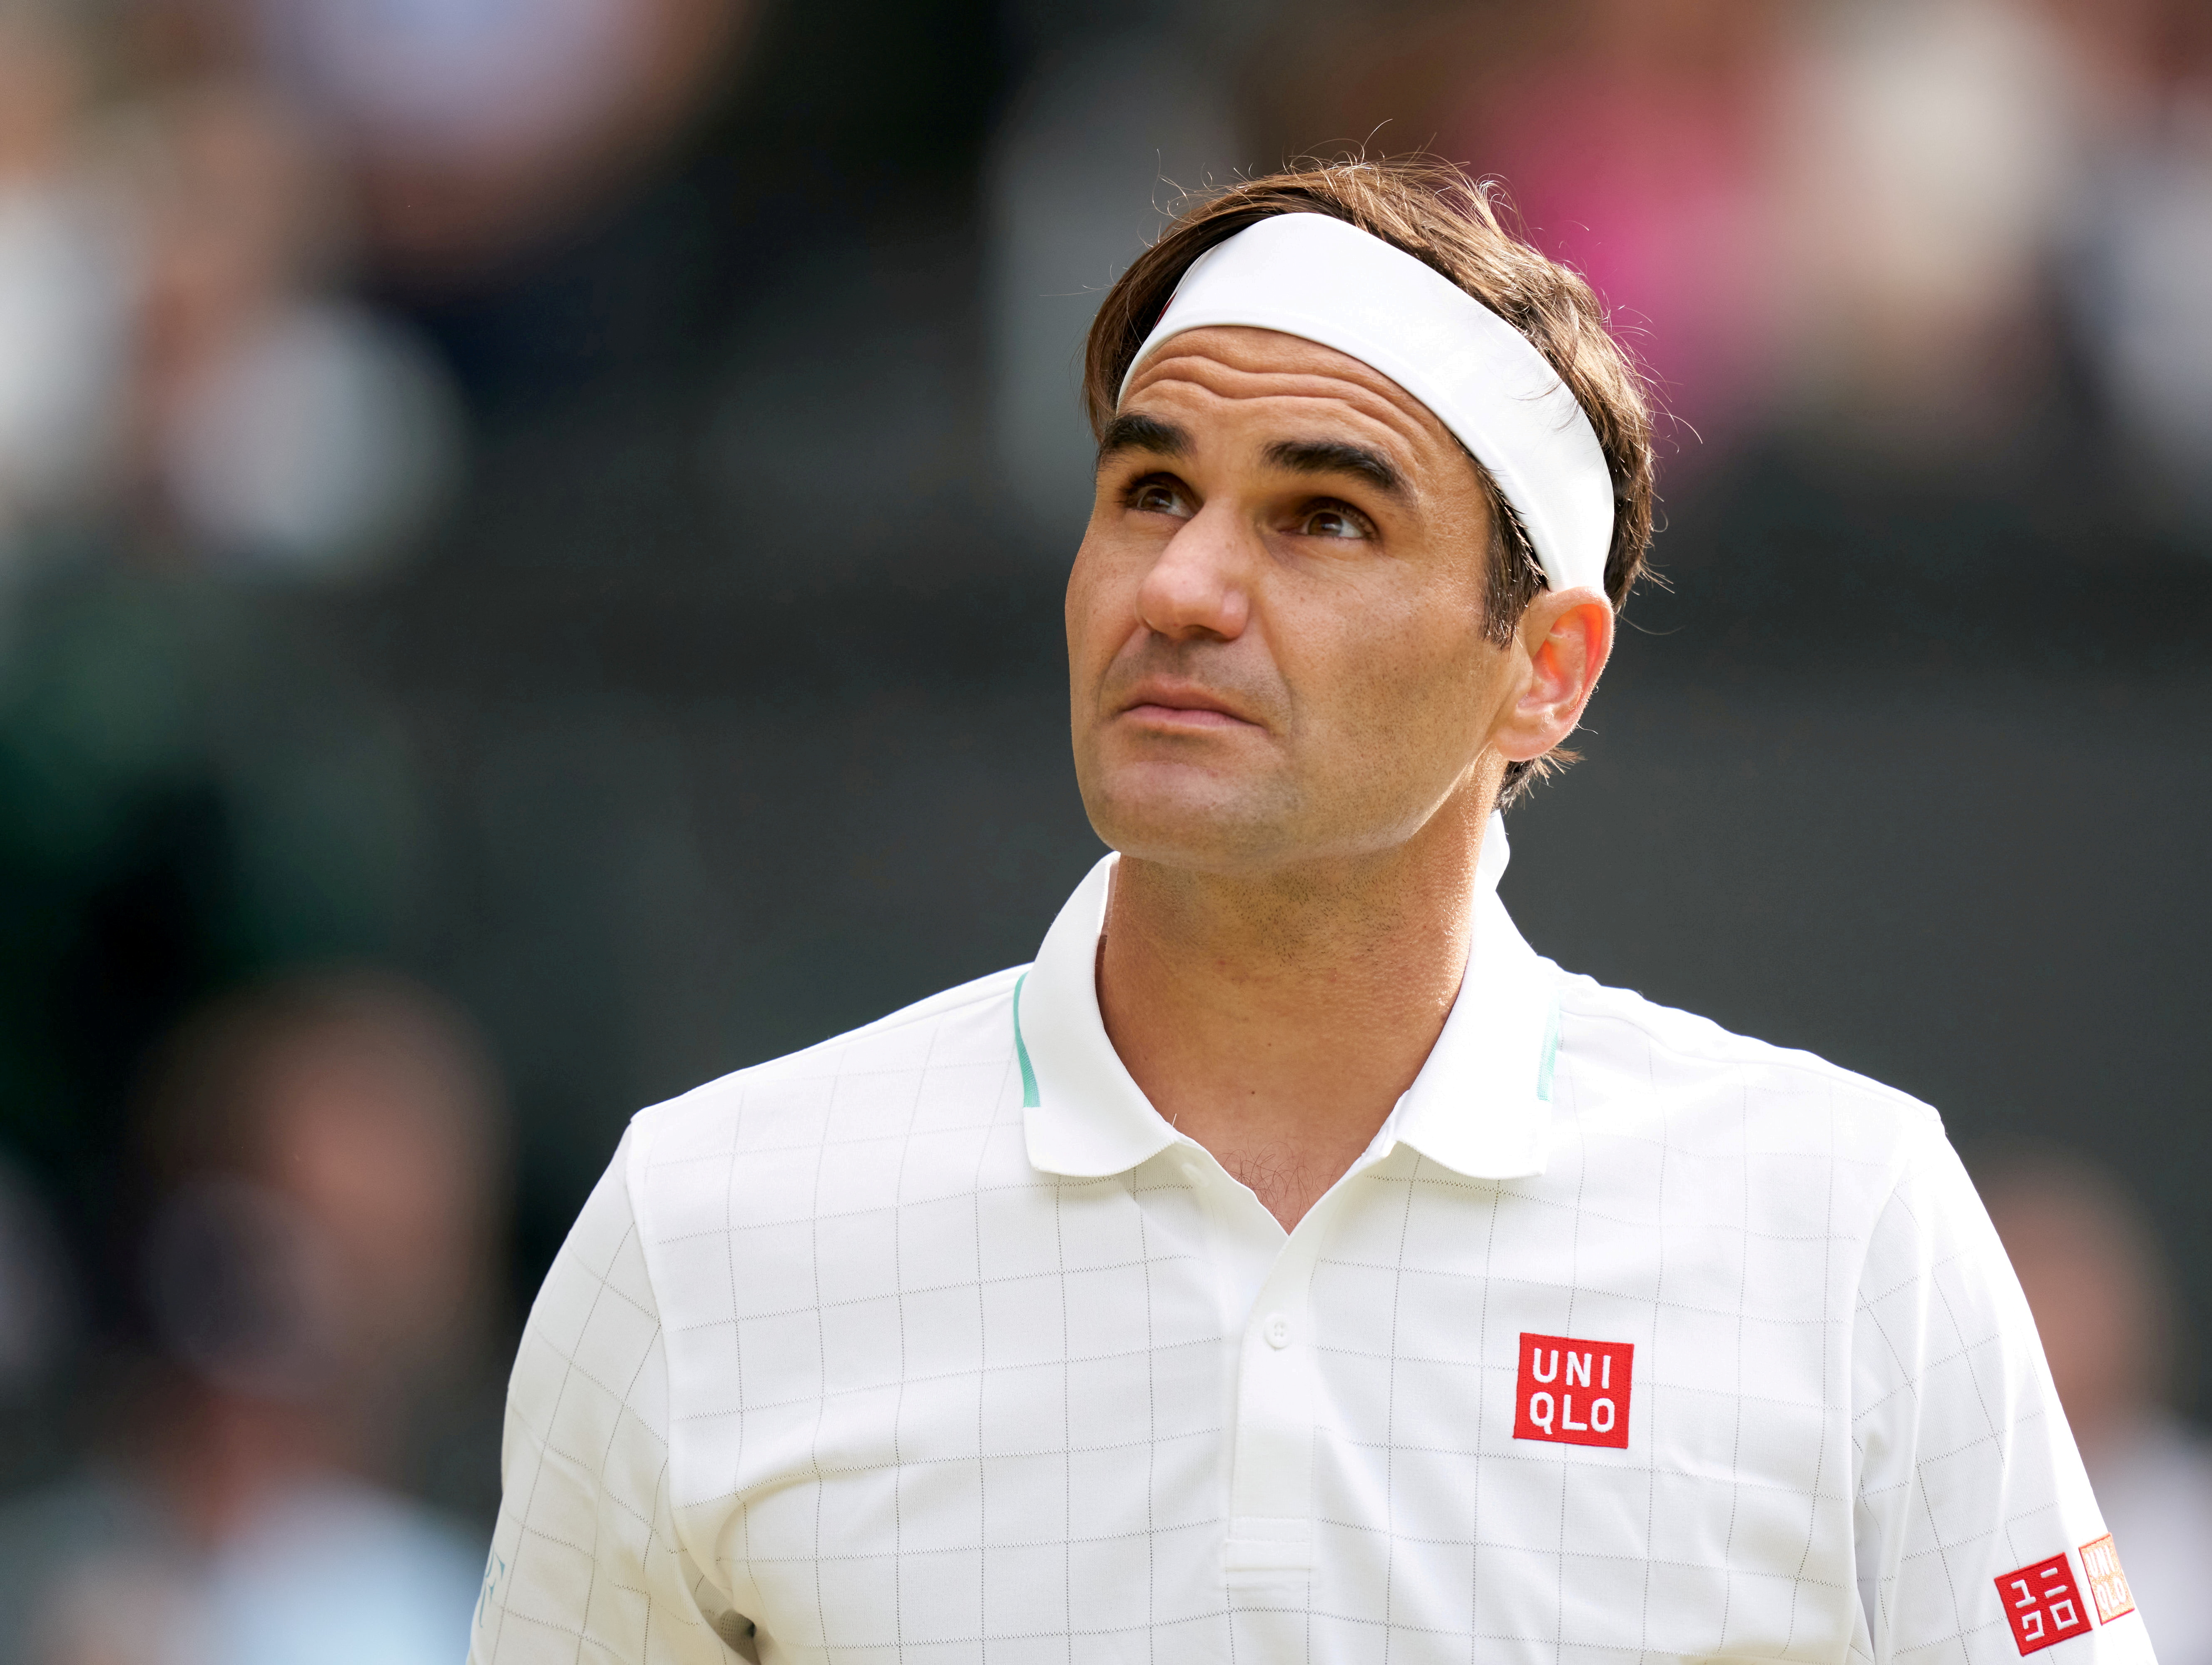 Roger Federer (SUI) plays against Hubert Hurkacz (POL) in the quarter finals at All England Lawn Tennis and Croquet Club. Jul 7, 2021; London, United Kingdom; Mandatory Credit: Peter van den Berg-USA TODAY Sports